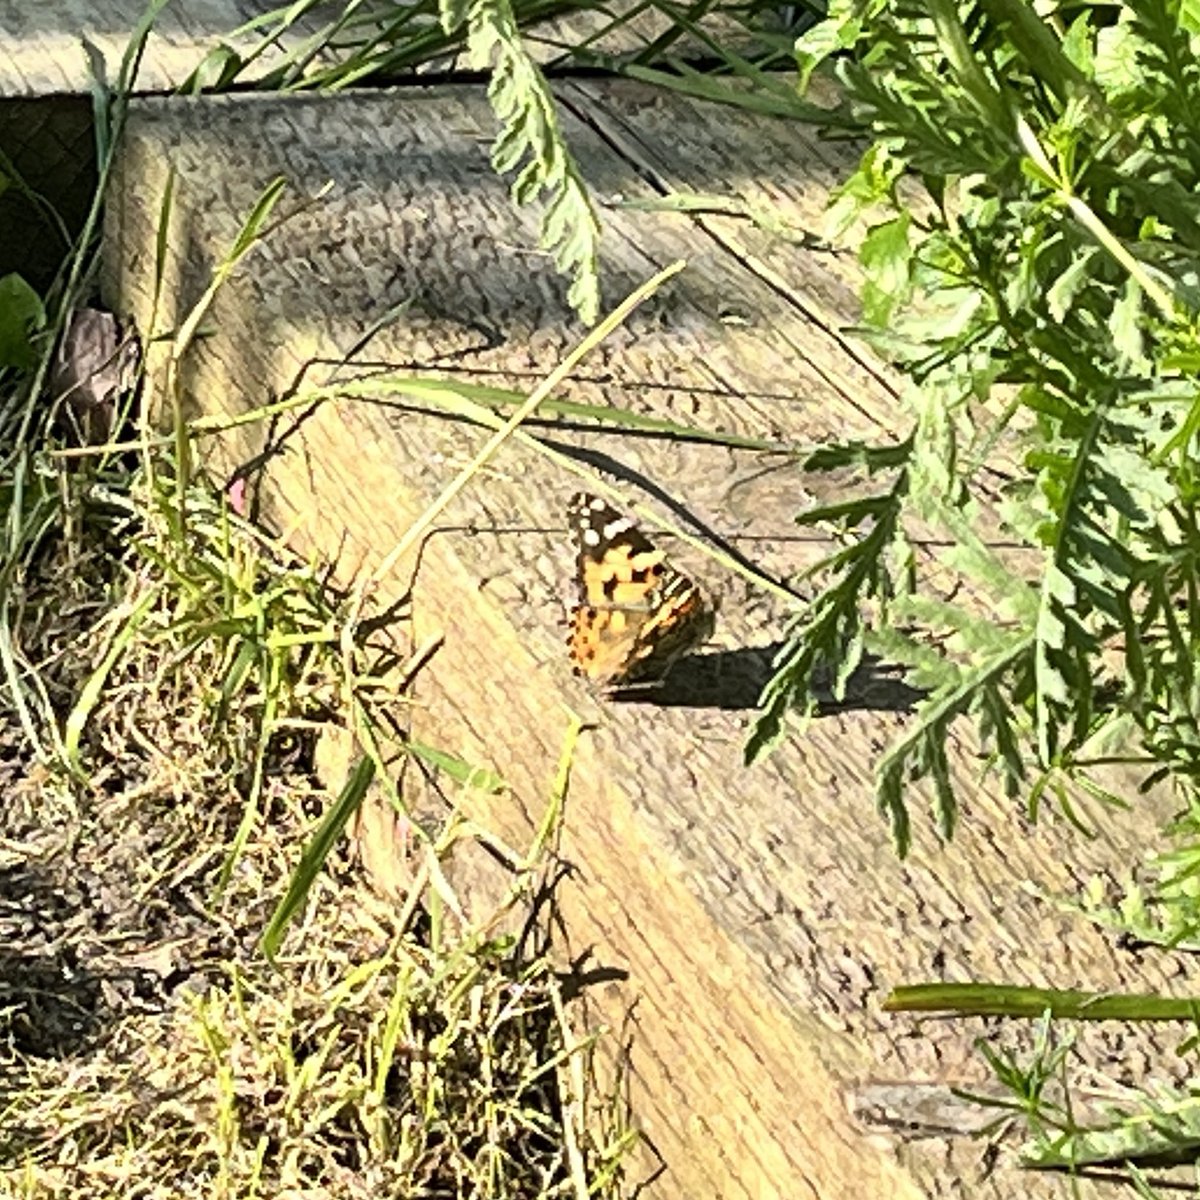 First Painted Lady Butterfly of the year! Scared her off in my haste to get a photo though 🤦🏻‍♂️ Vanessa cardui #Butterflies #Lepidoptera #NatureGarden